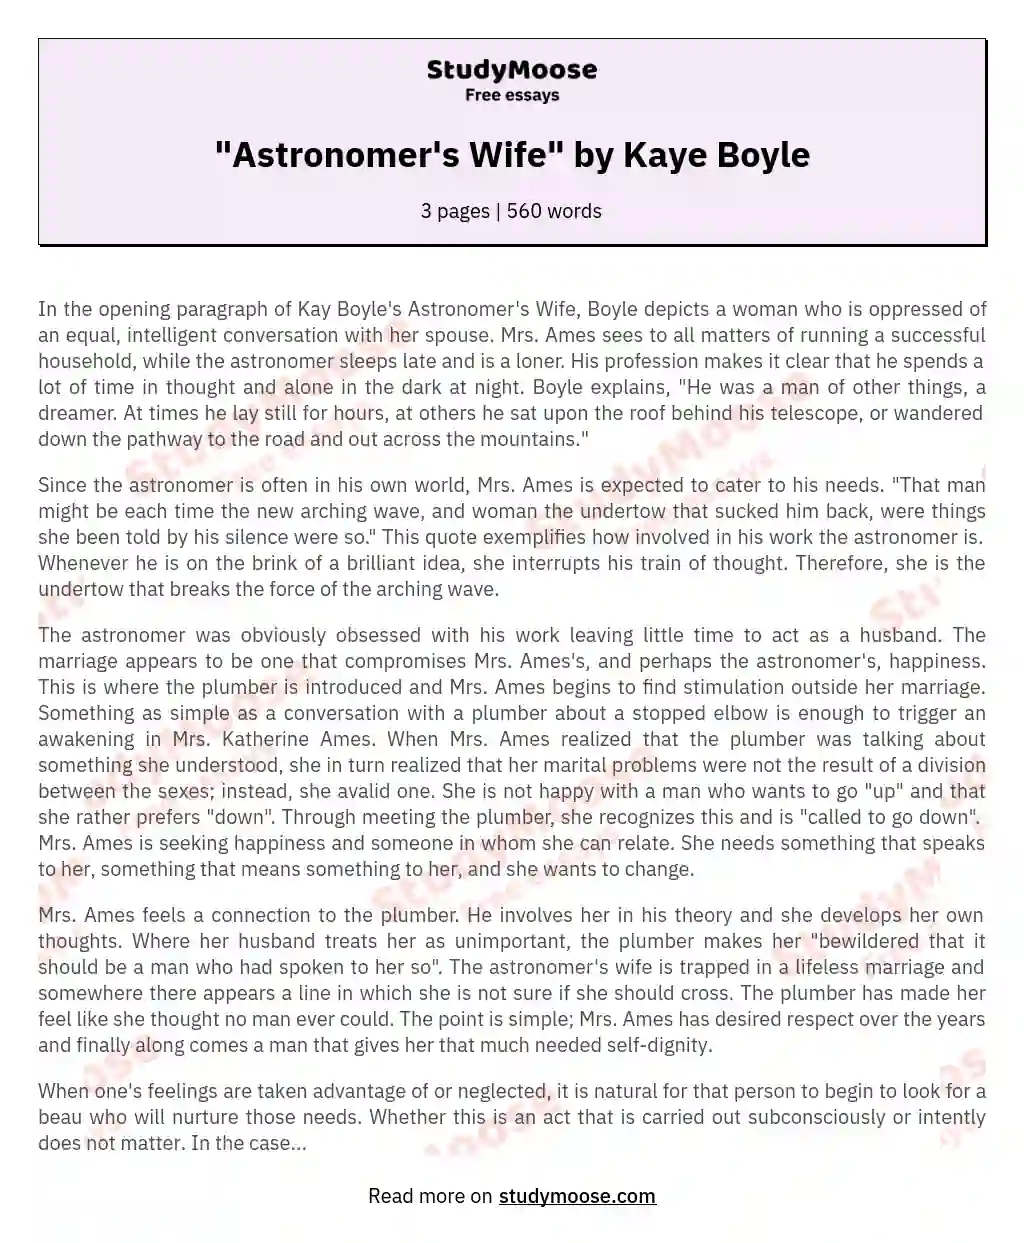 "Astronomer's Wife" by Kaye Boyle essay